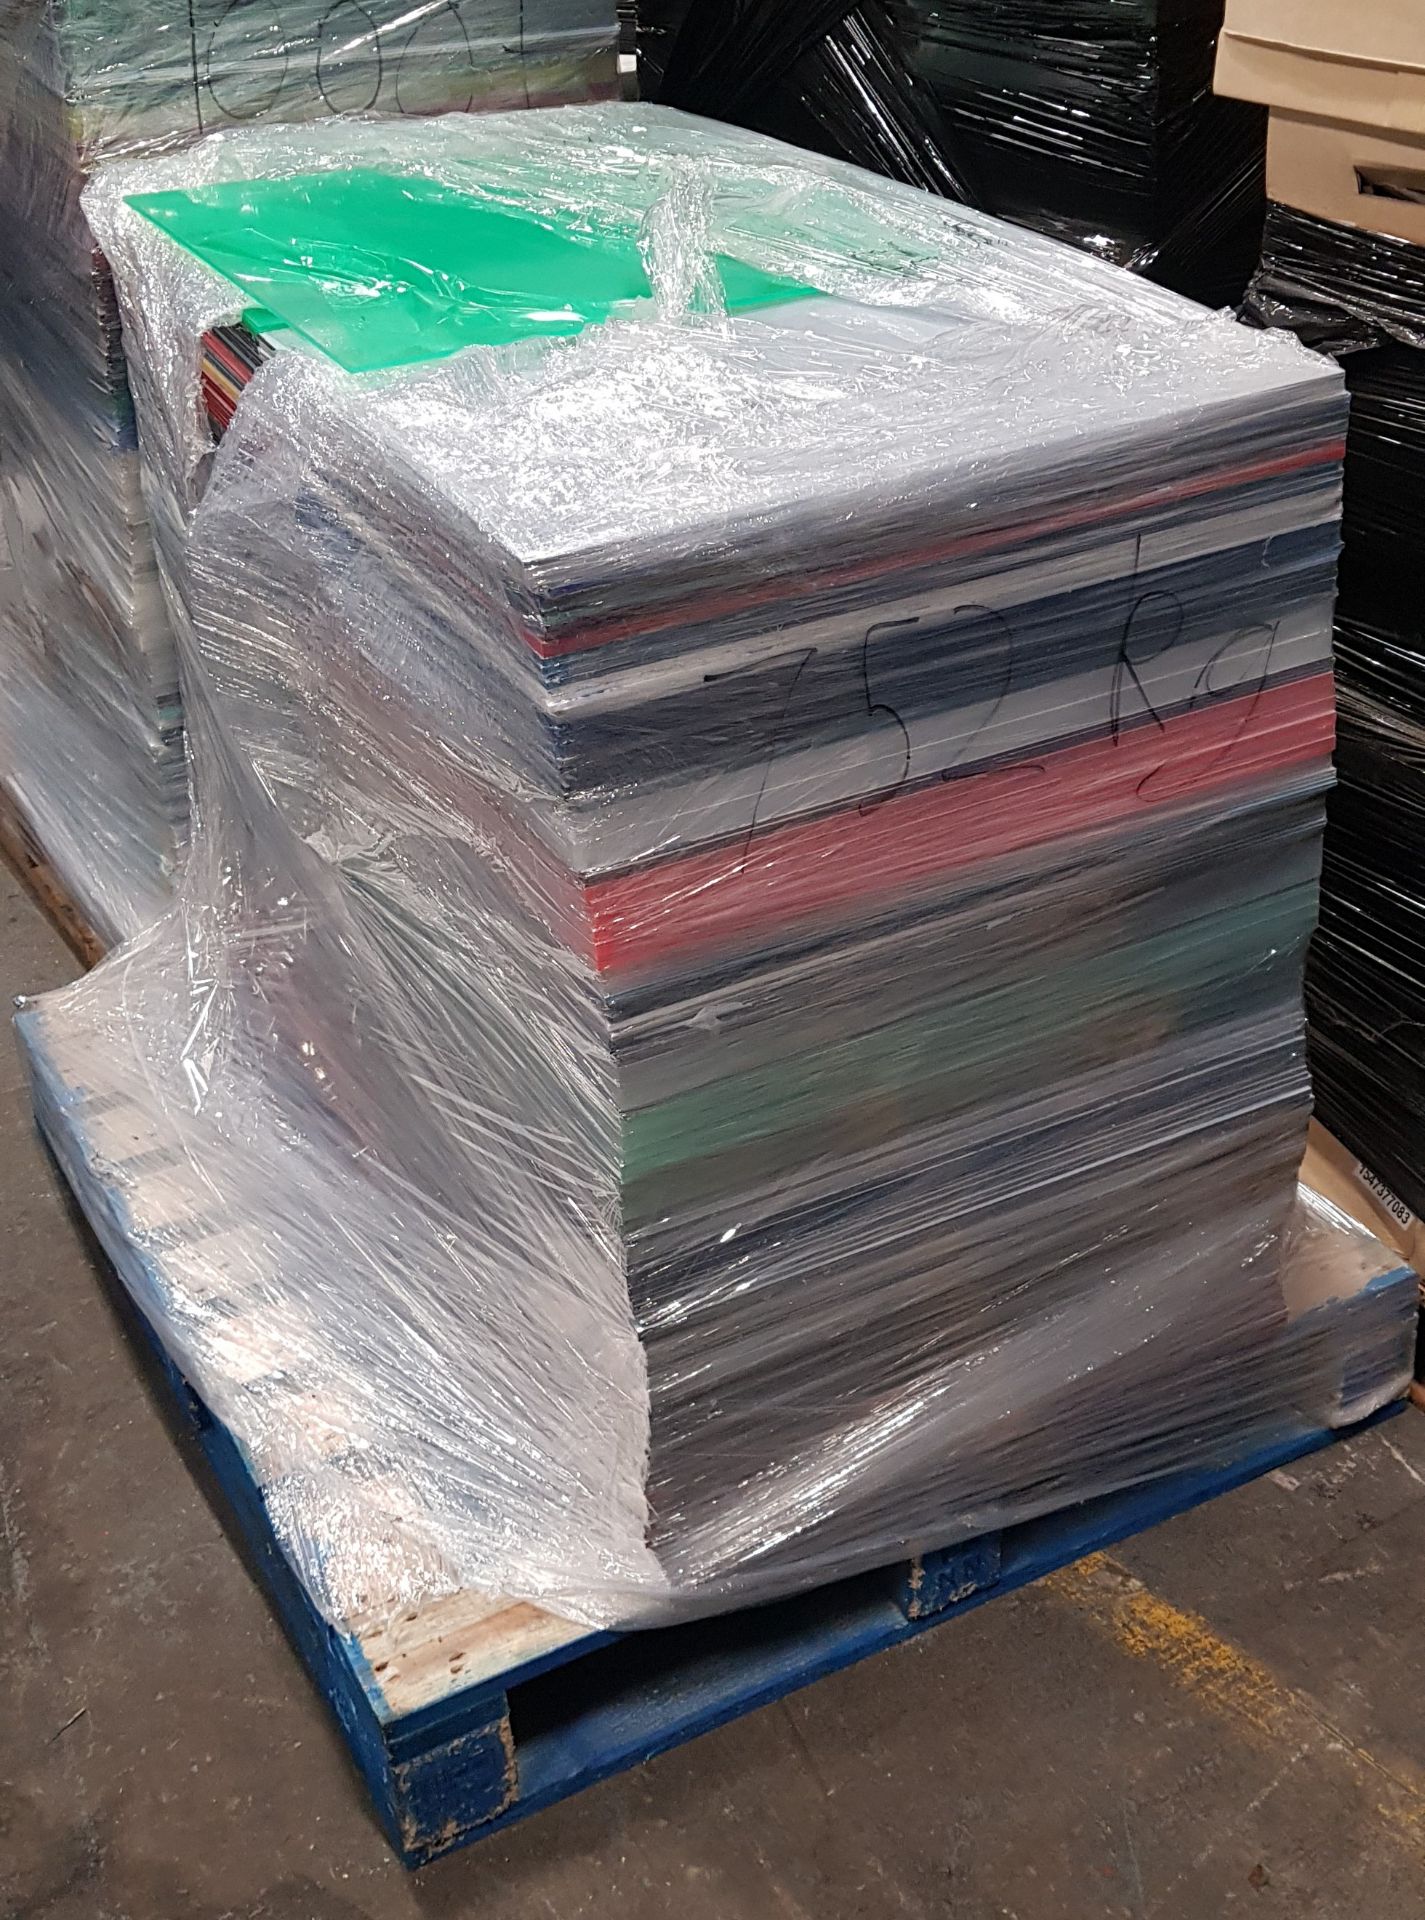 3/4 PALLET OF ACRYLIC PERSPEX CLEAR & OPAQUE 600MM SQUARE OFFCUTS IN VARIOUS COLOURS & - Image 2 of 2